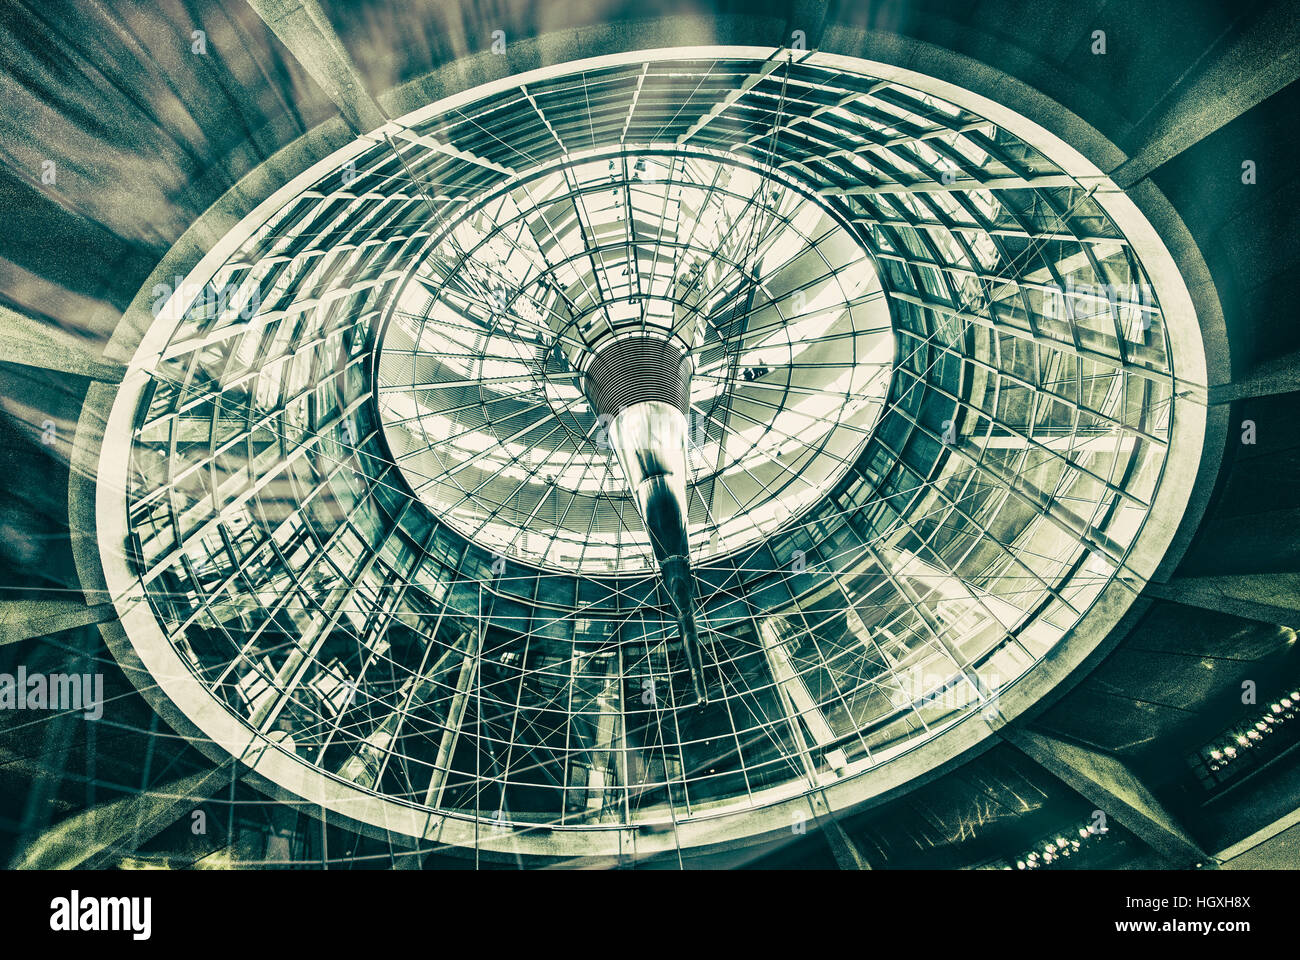 Glass dome of the Reichstag building in Berlin seen from the plenary hall. Stock Photo